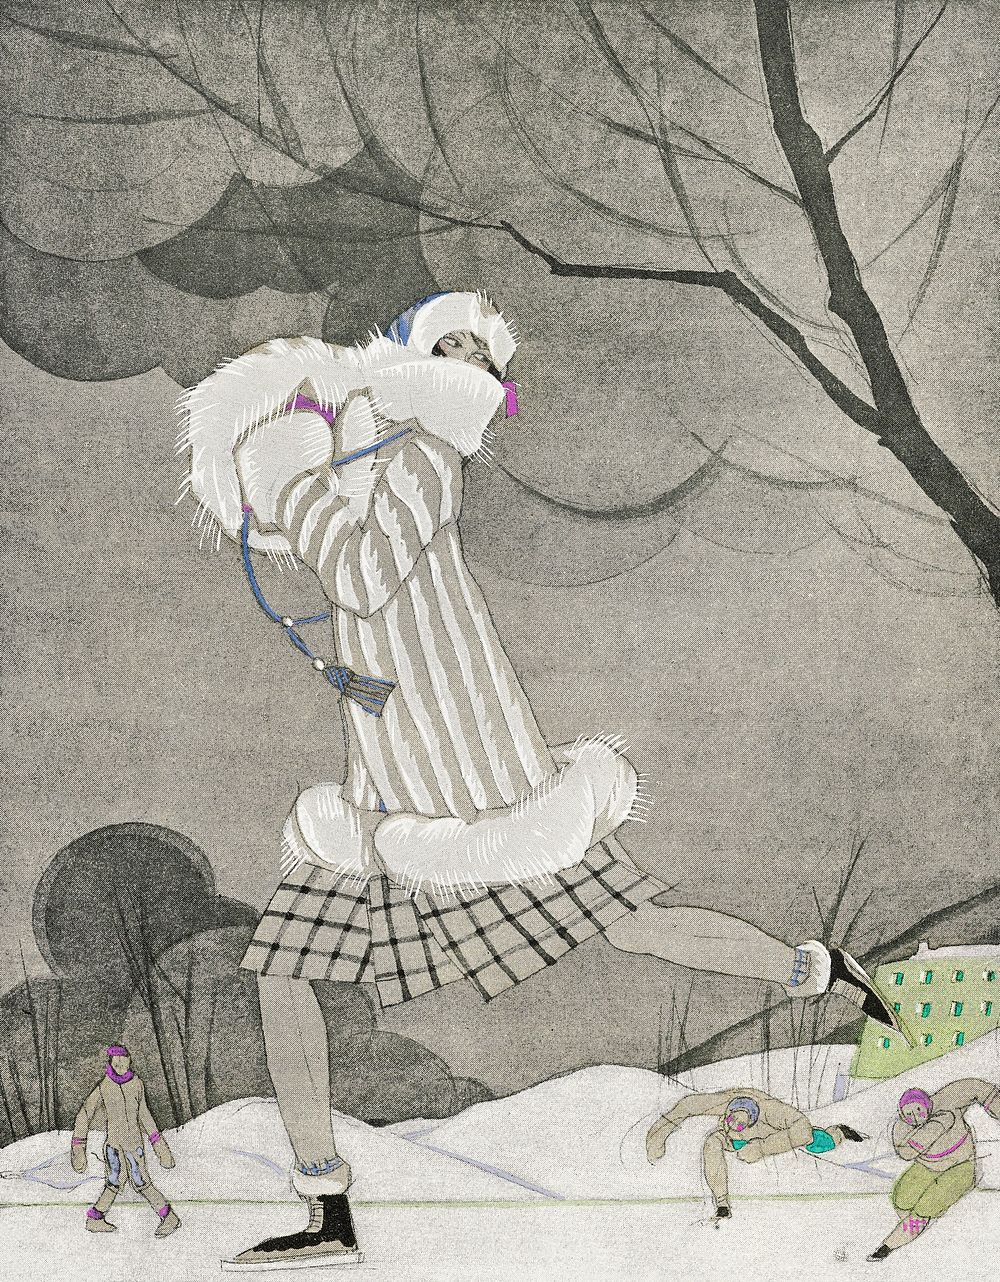 Female skater in winter  illustration, remixed from the artworks by Charles Martin